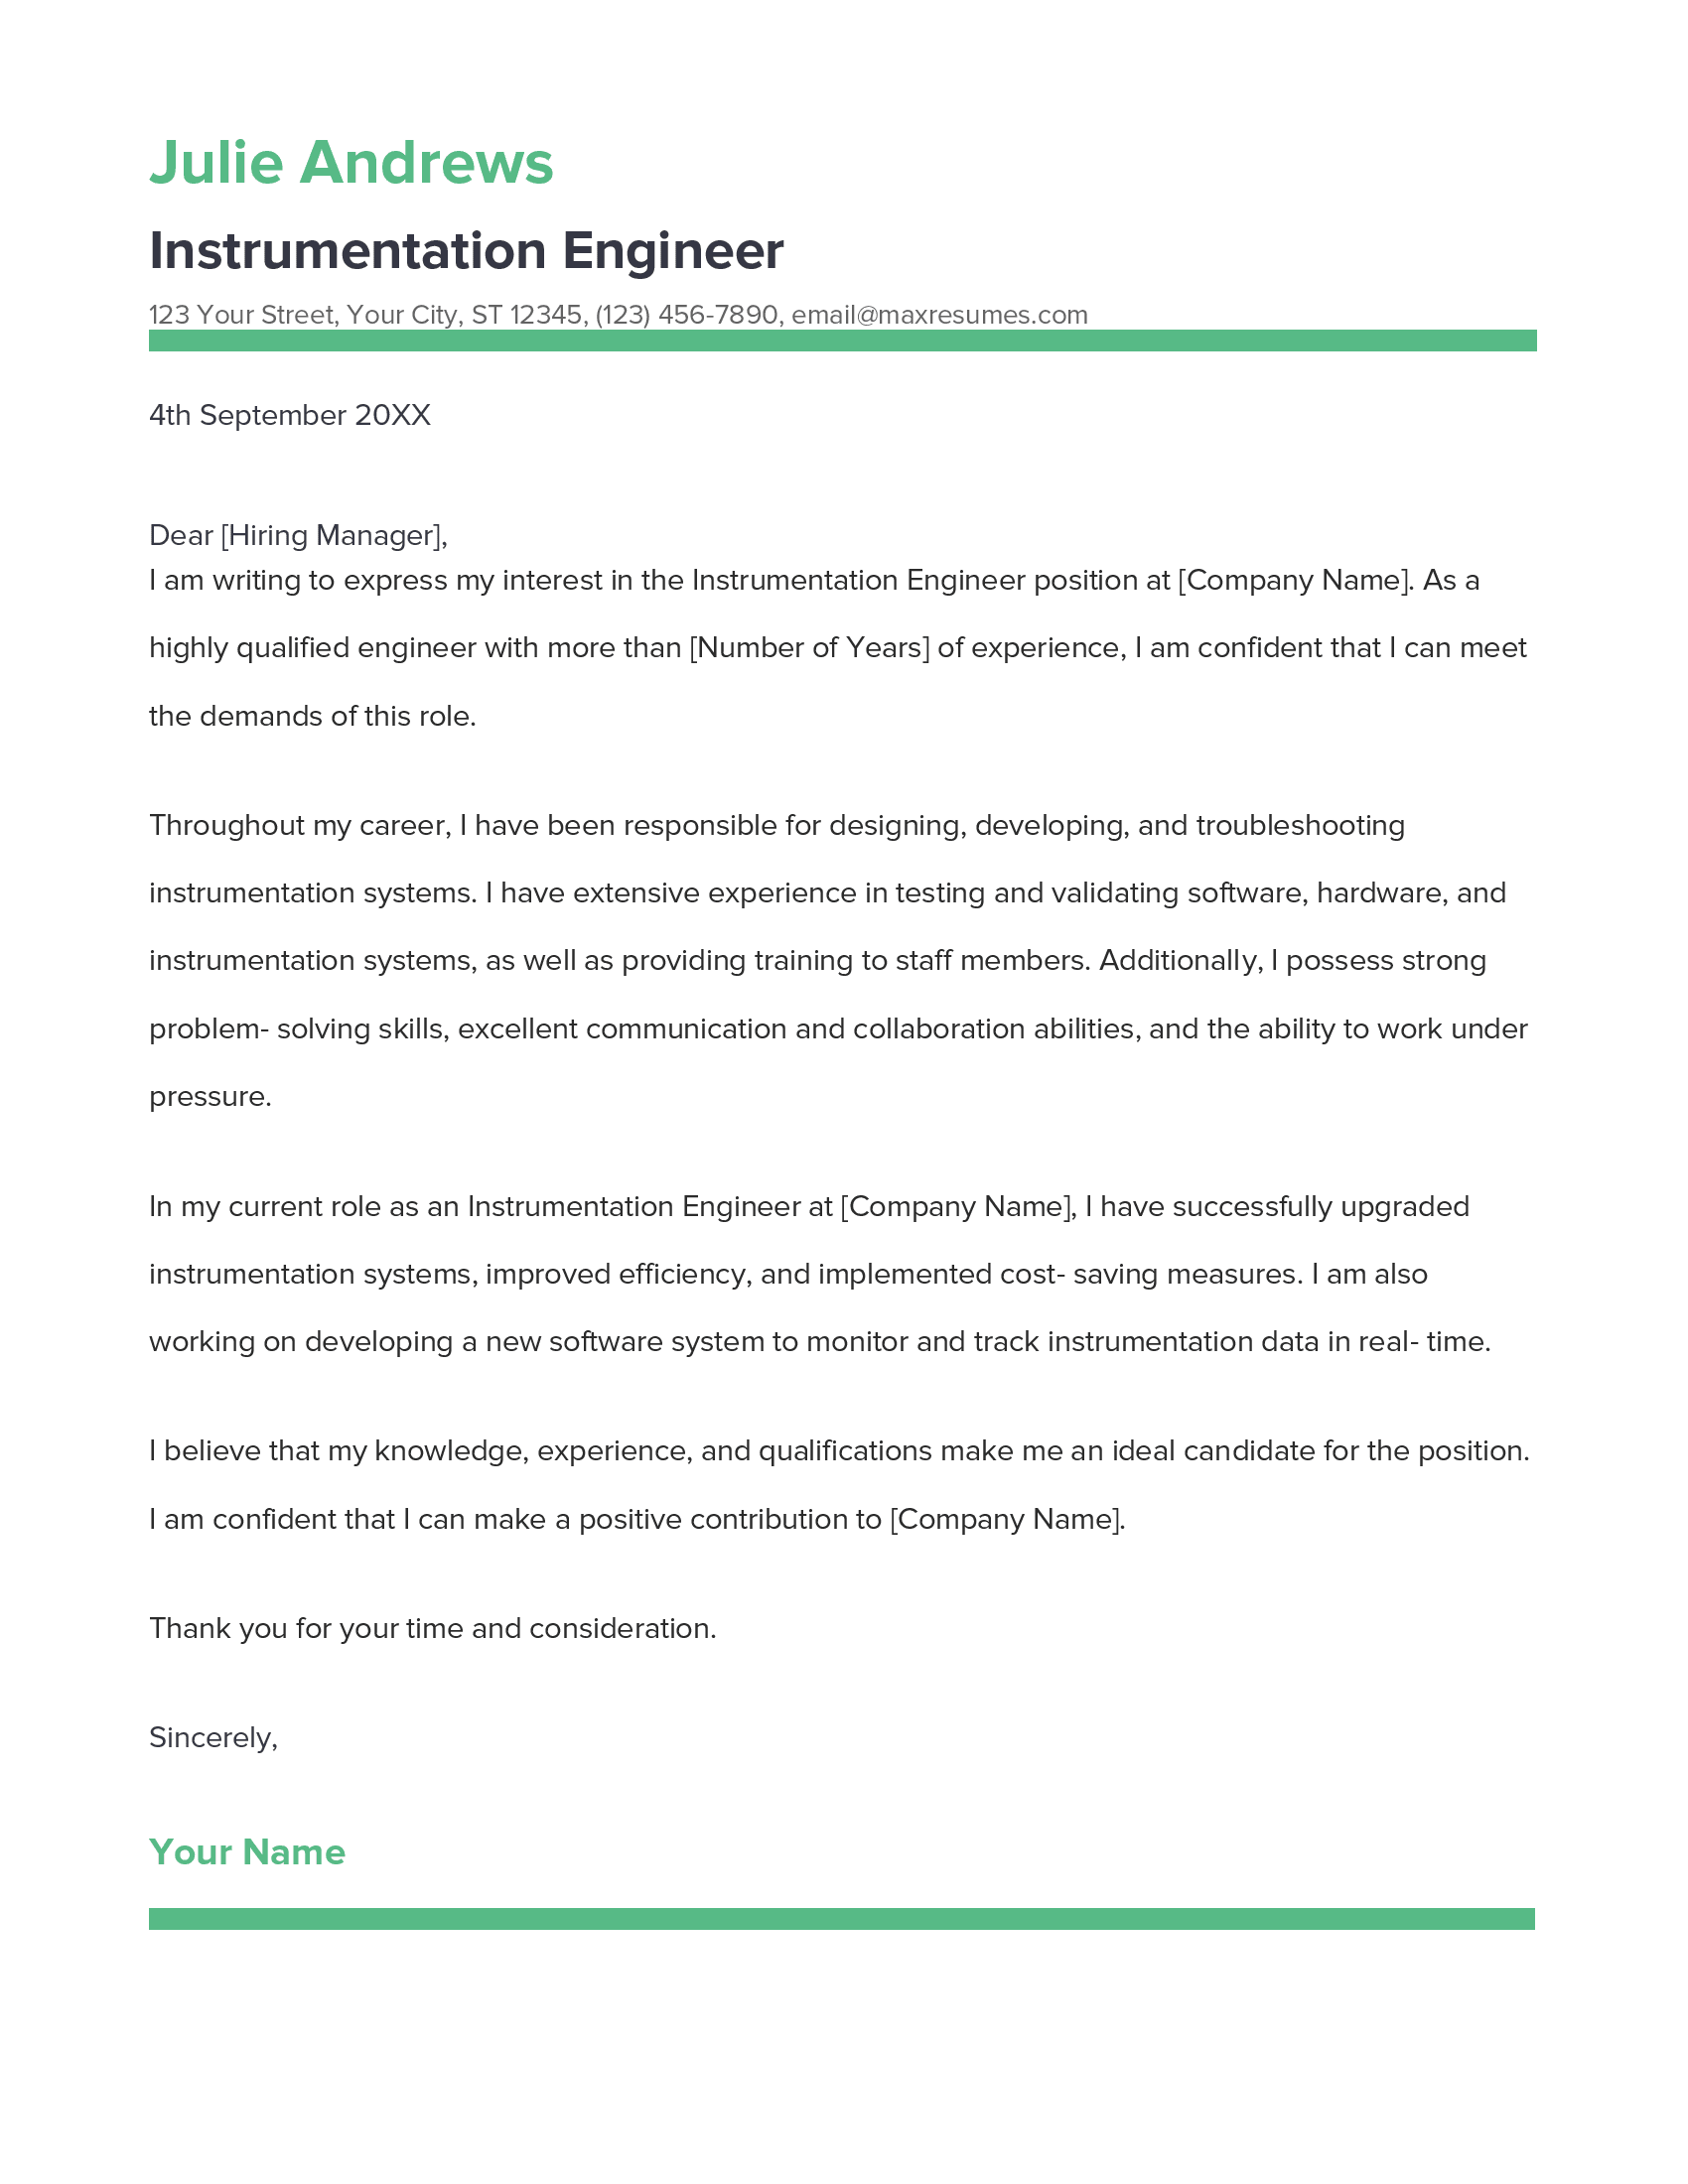 Instrumentation Engineer Cover Letter Example